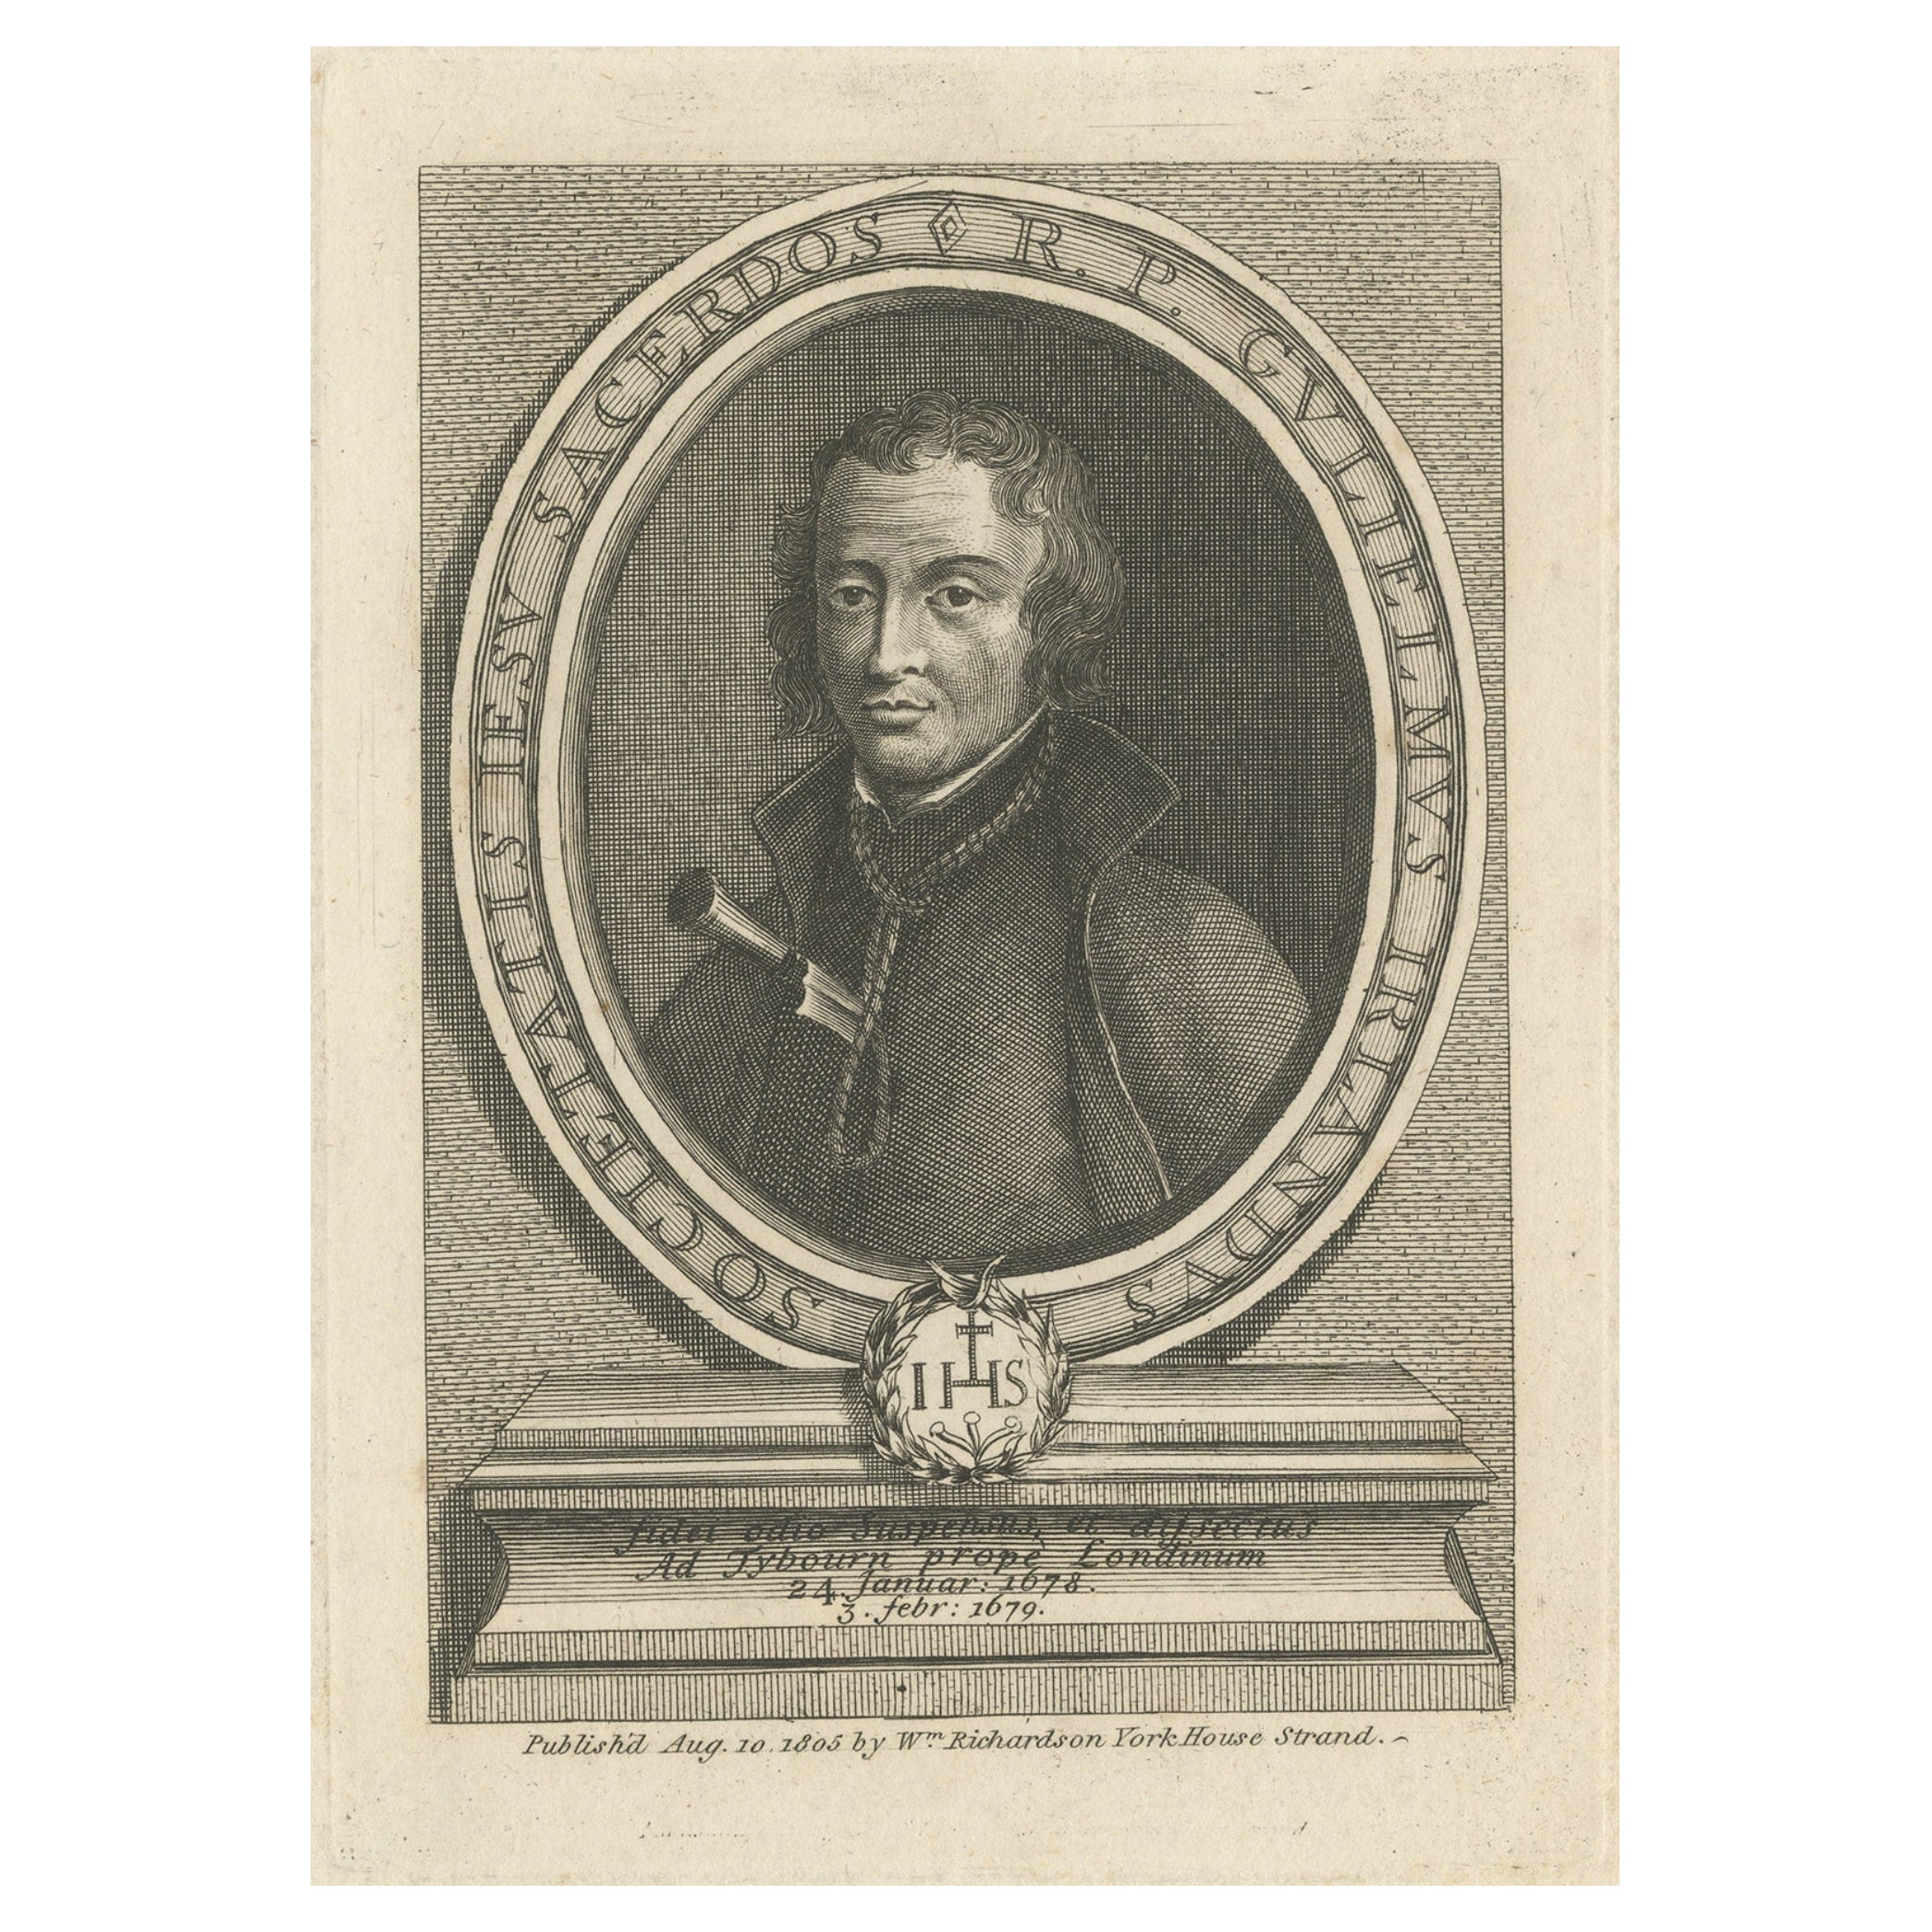 Portrait of William Ireland, Jesuit and Martyr from Lincolnshire, England, 1805